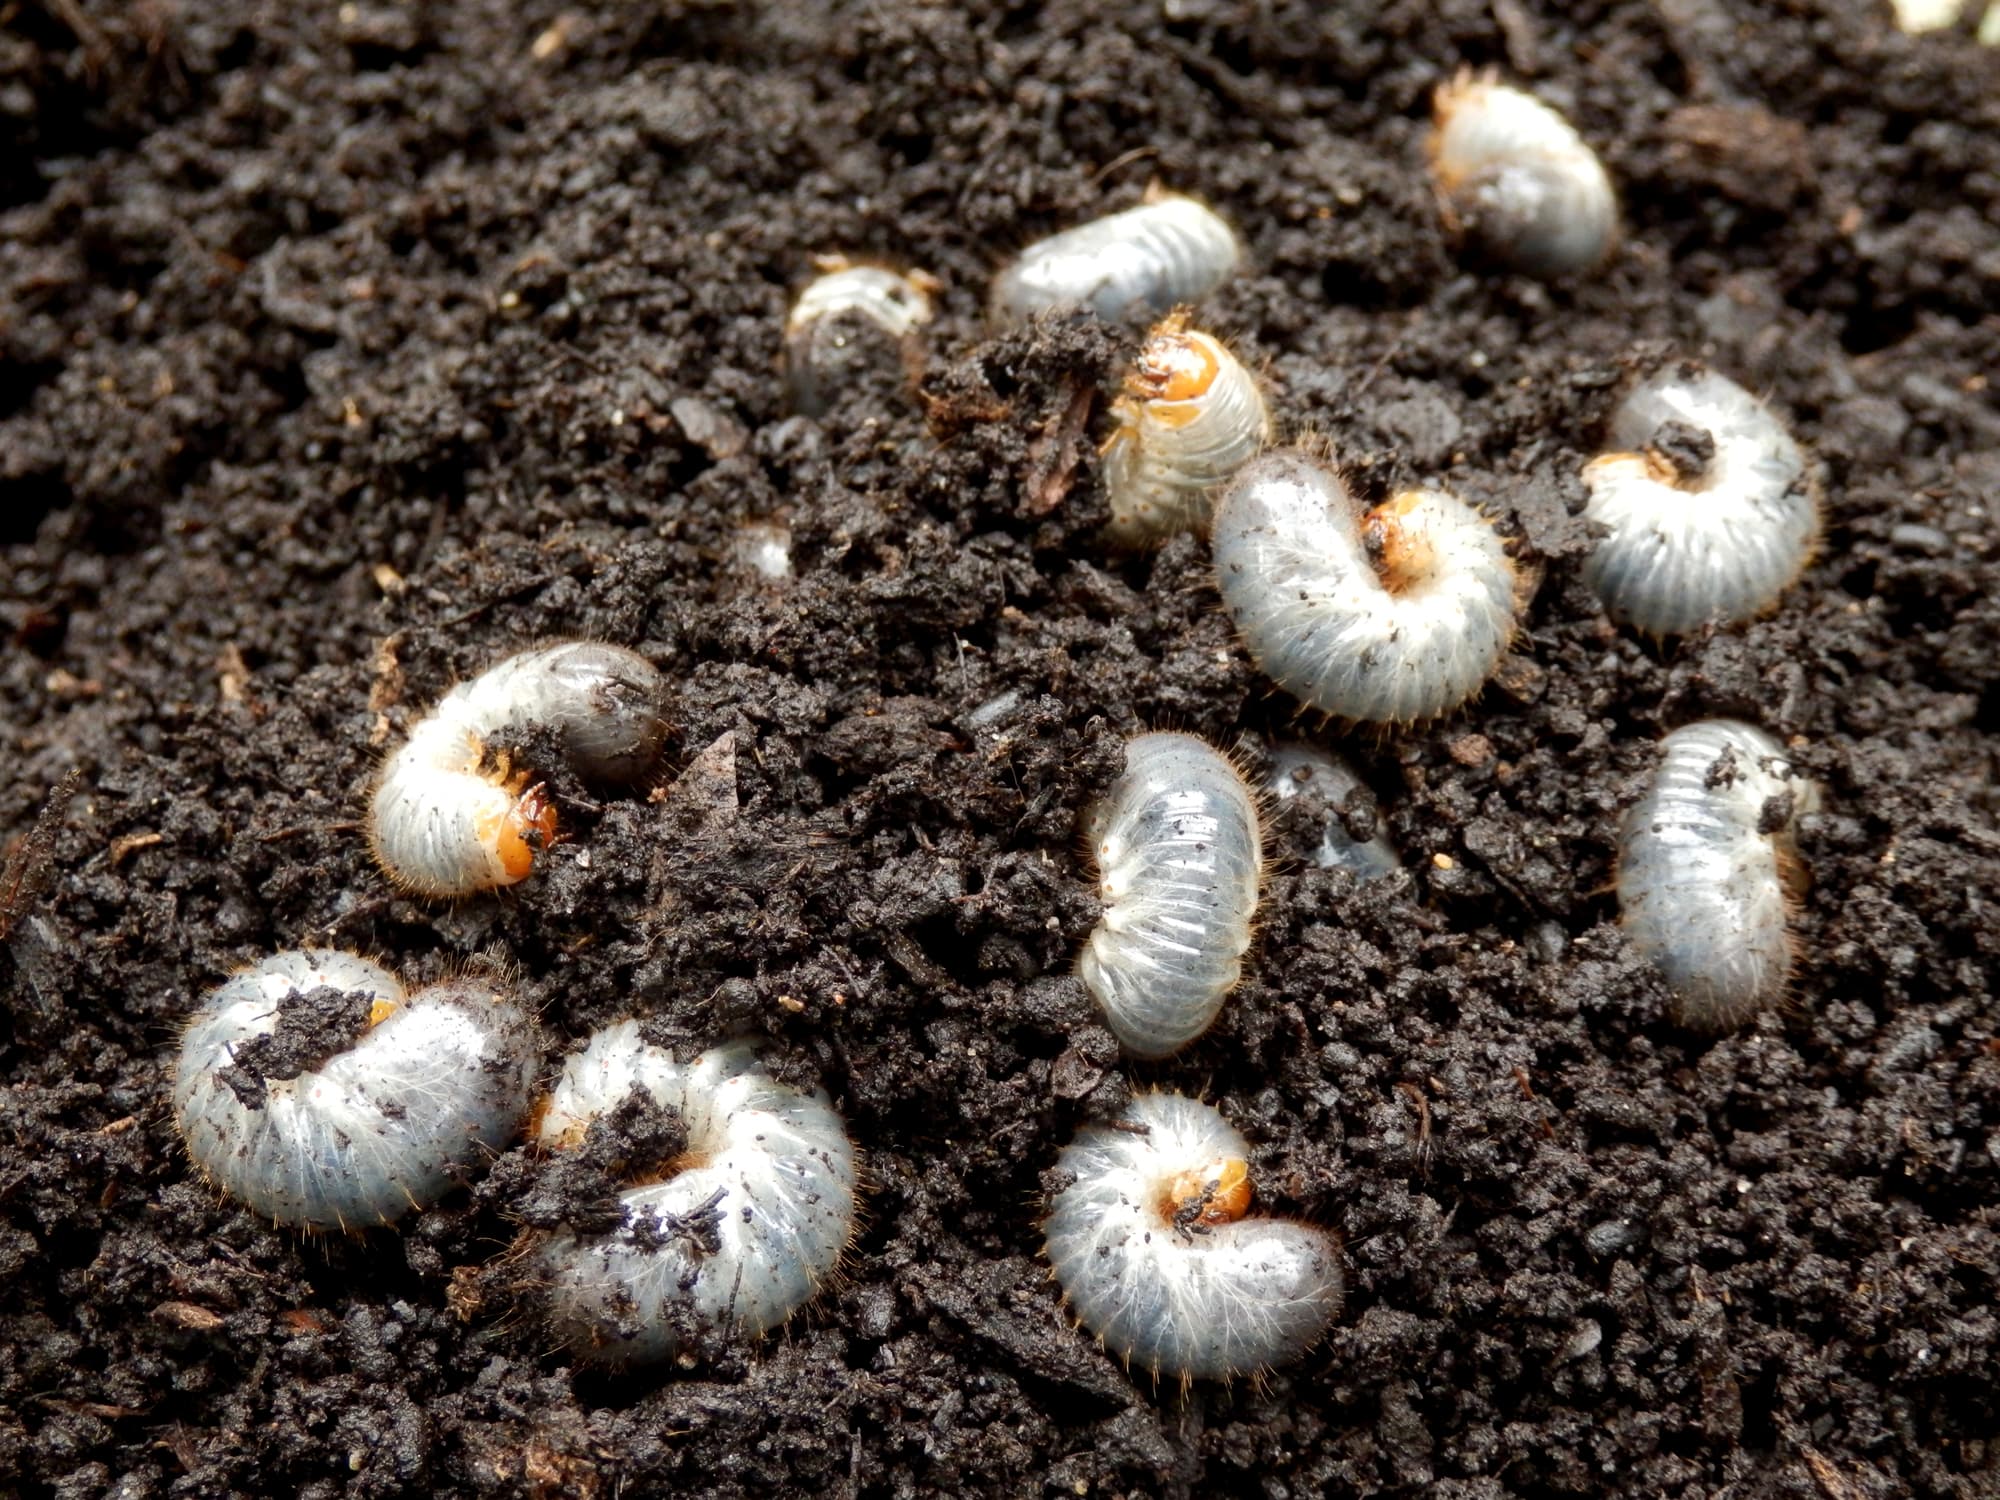 Guest or Pest: White Grubs